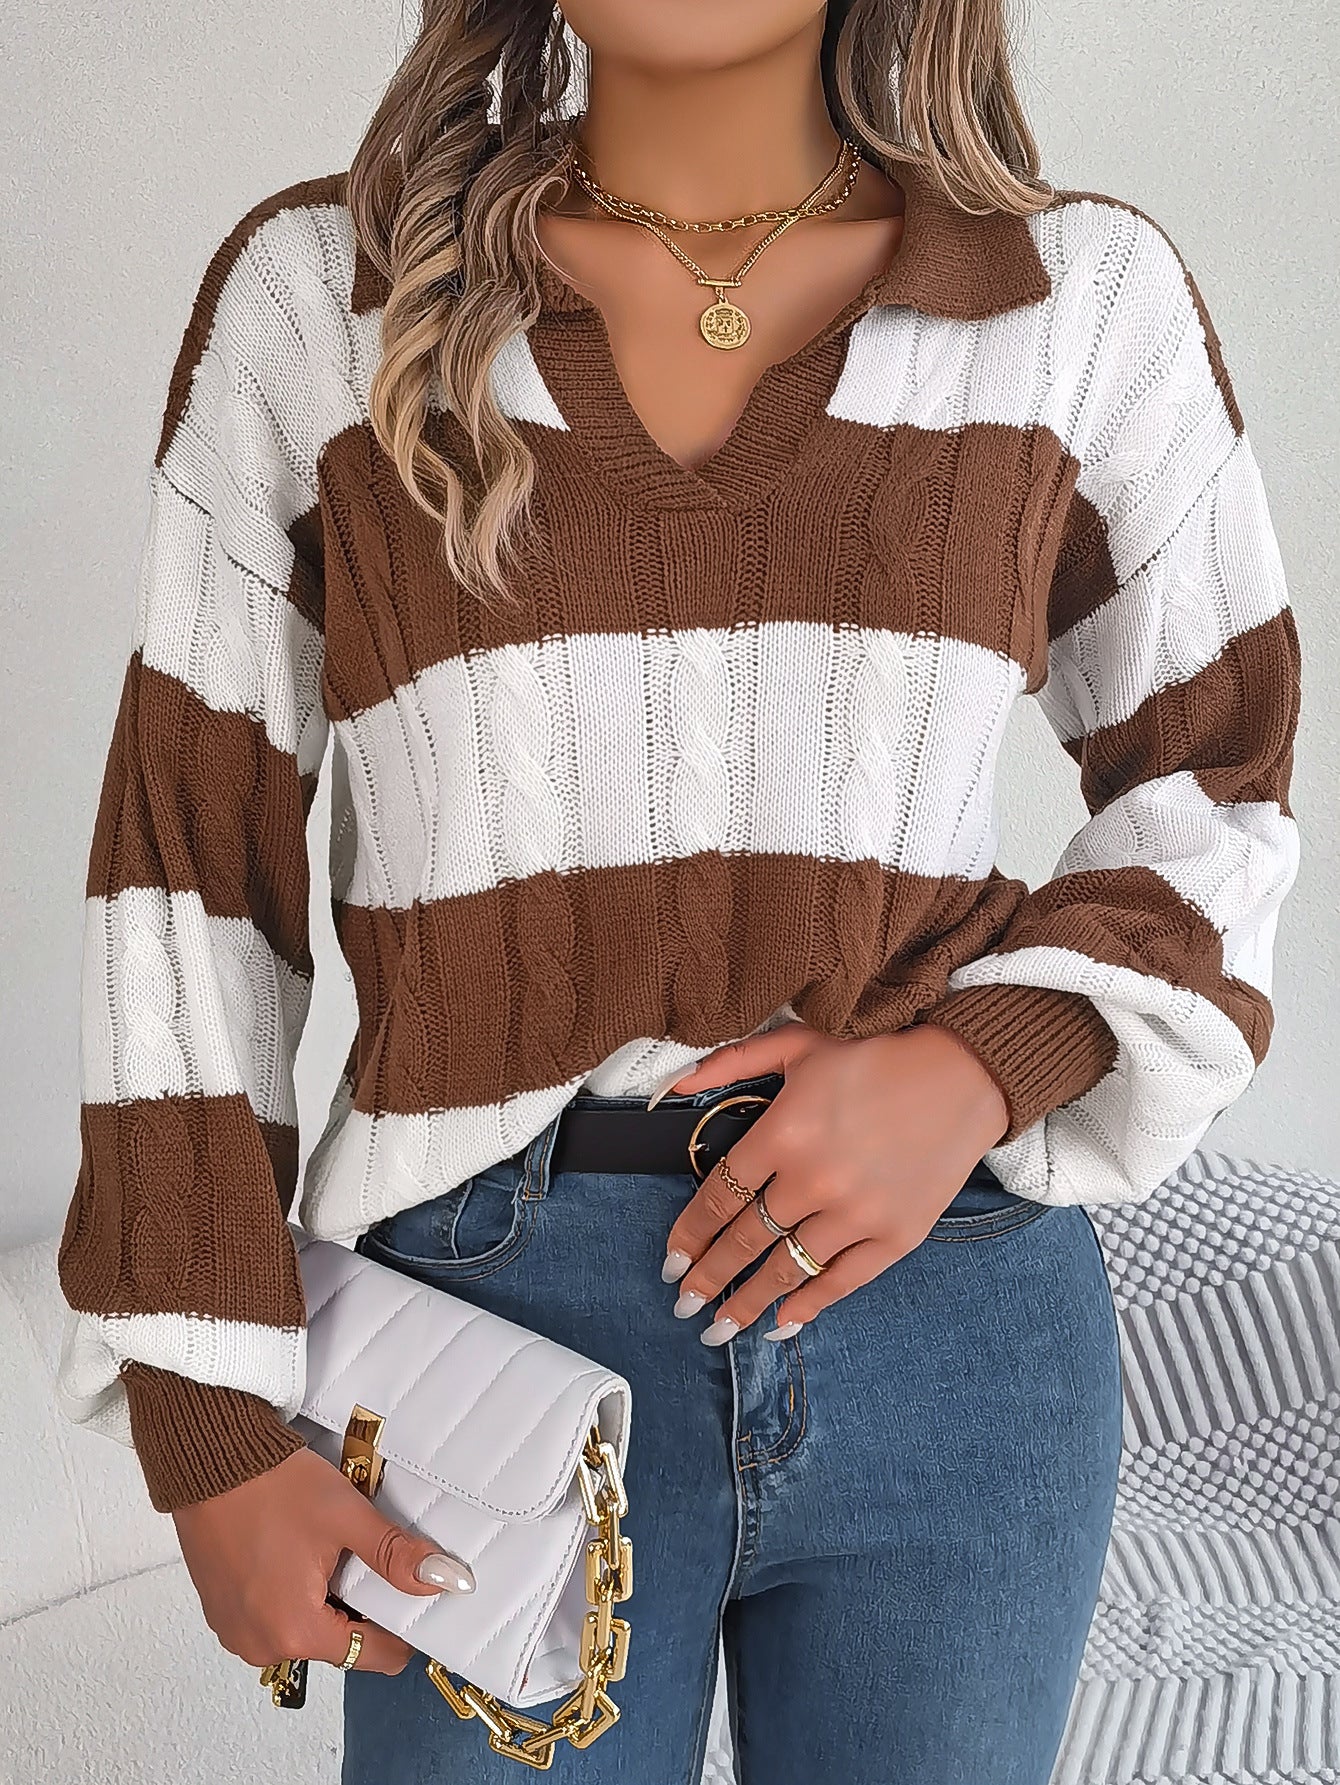 BamBam Autumn And Winter Casual V Neck Contrast Color Lantern Sleeve Pullover Women Sweater - BamBam